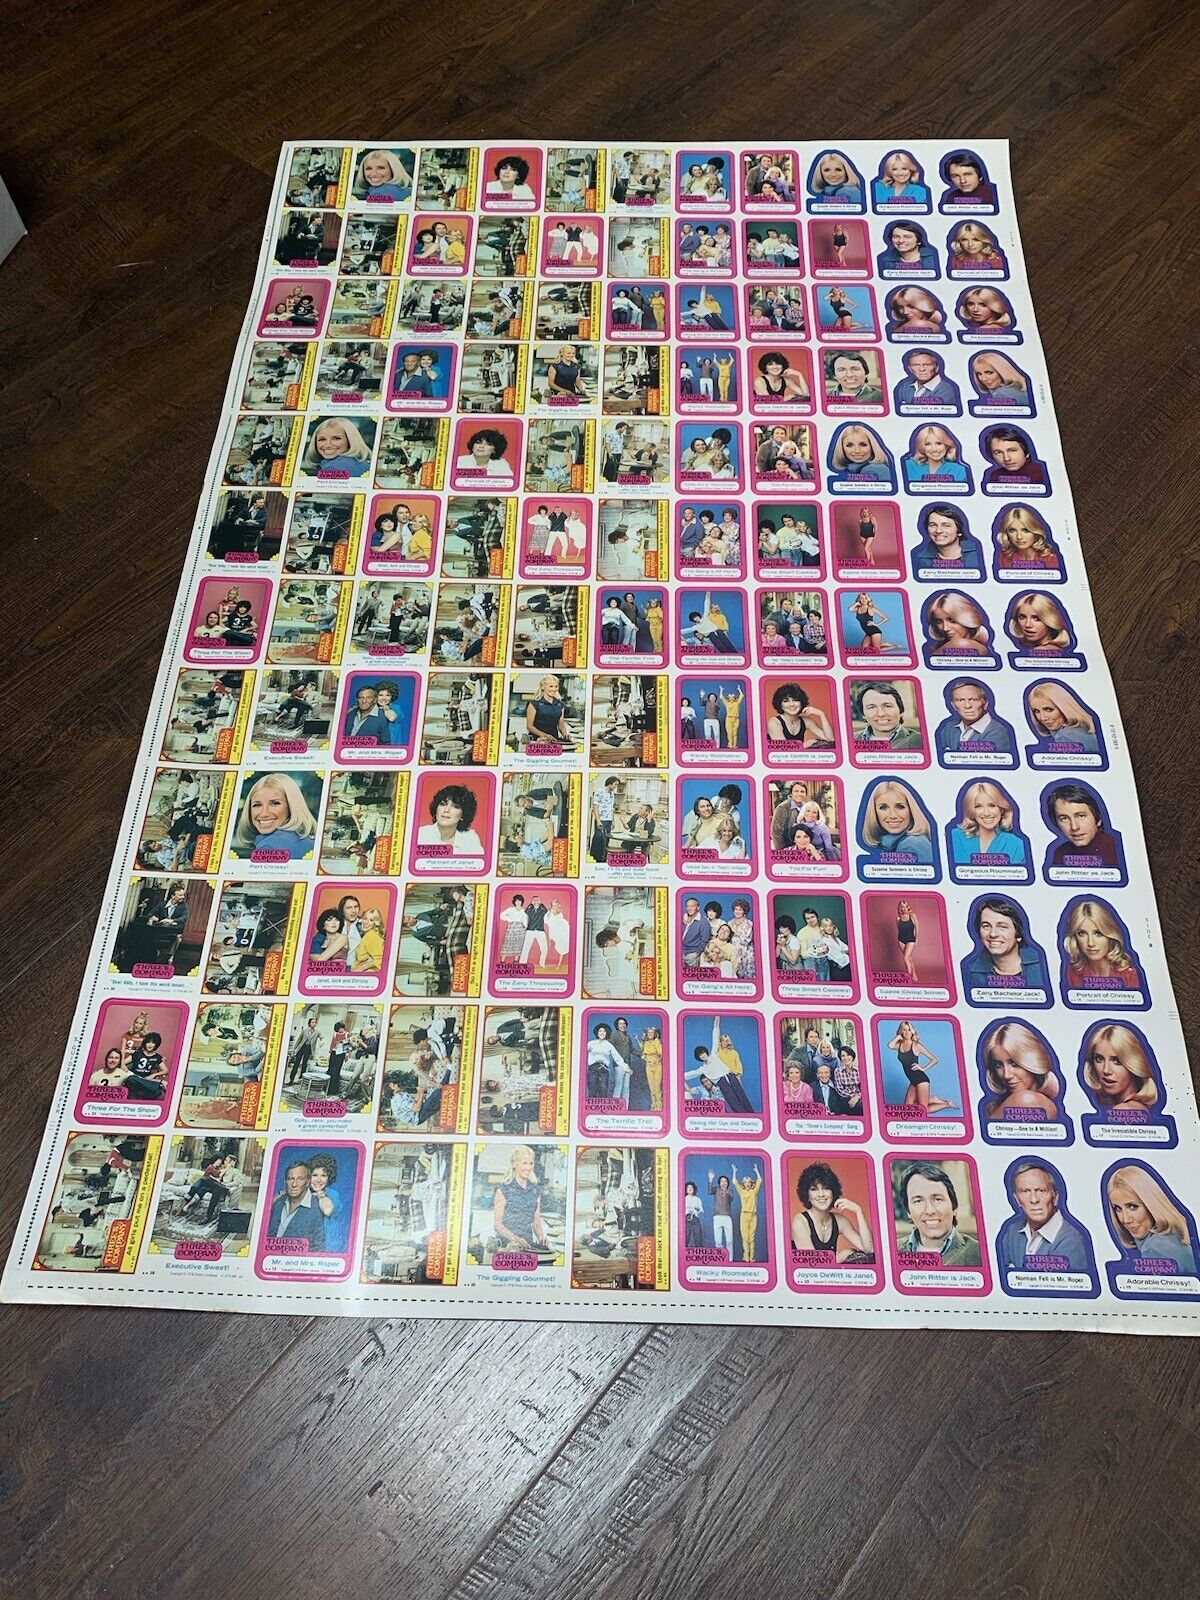 1978 Threes Company UNCUT SHEET CARDS 132 Cards/Stickers 44”x29”